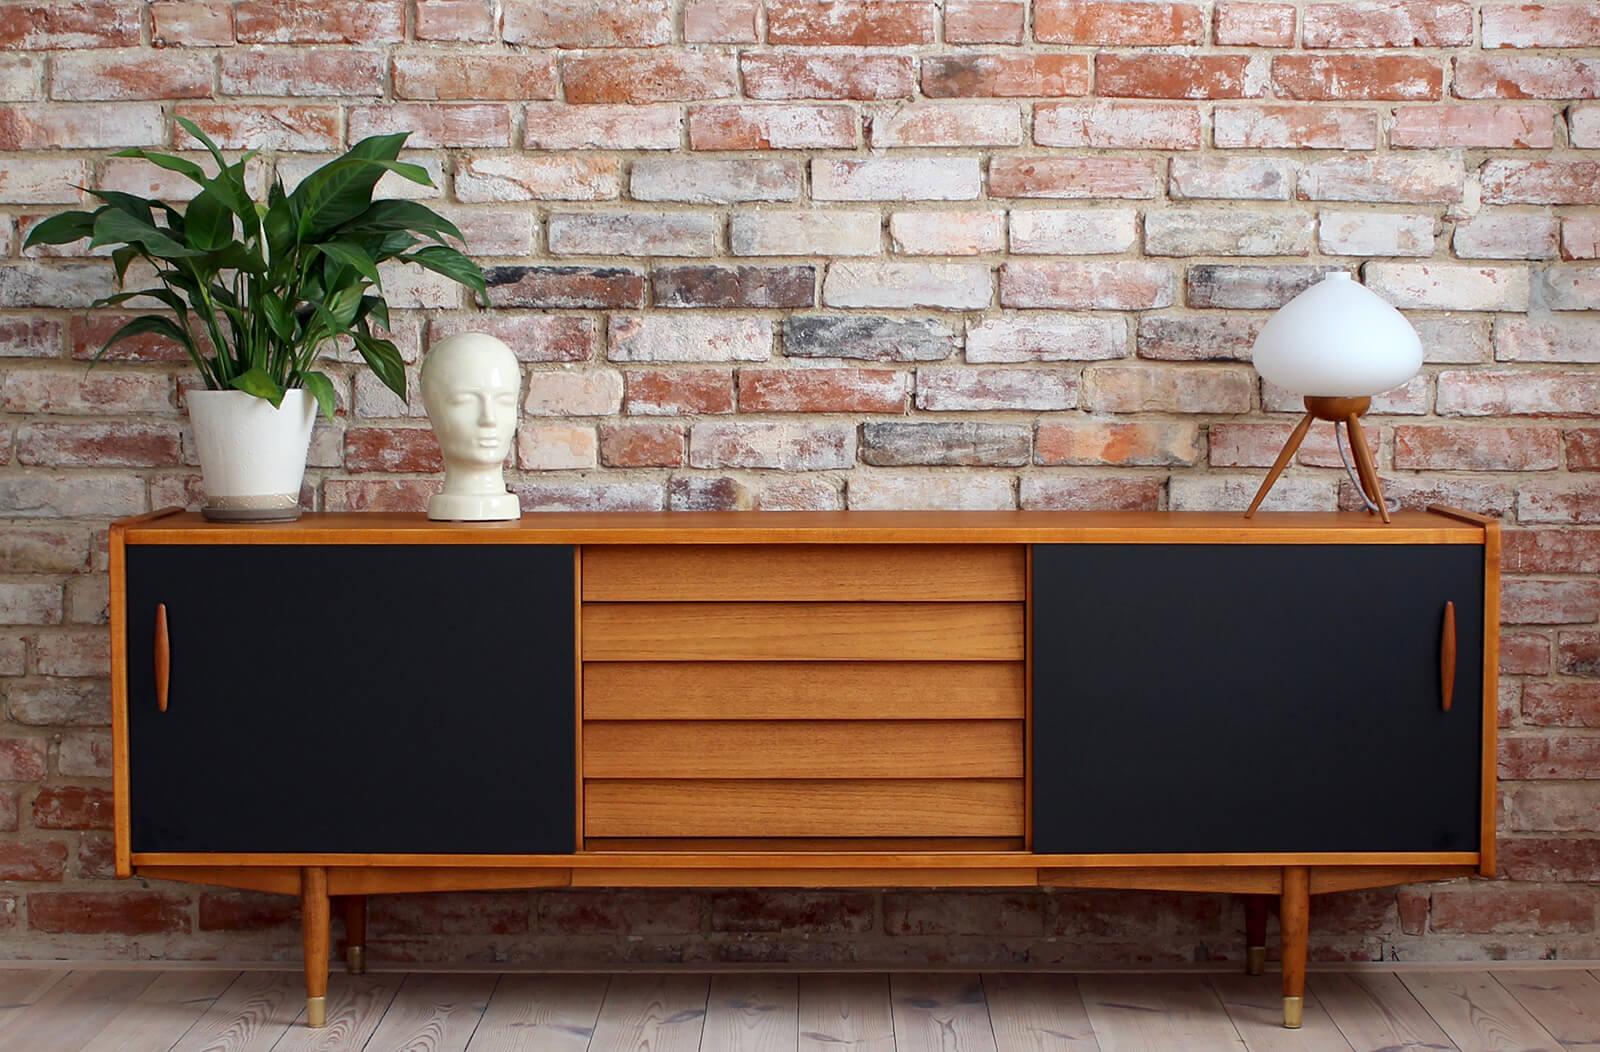 This is not so common model of sideboard by Nils Jonsson in teakwood with black sliding door, two sculpted handles, elegant base completed with subtle sculpted legs, all 4 legs are finished with brass – a great example of Scandinavian Modern style